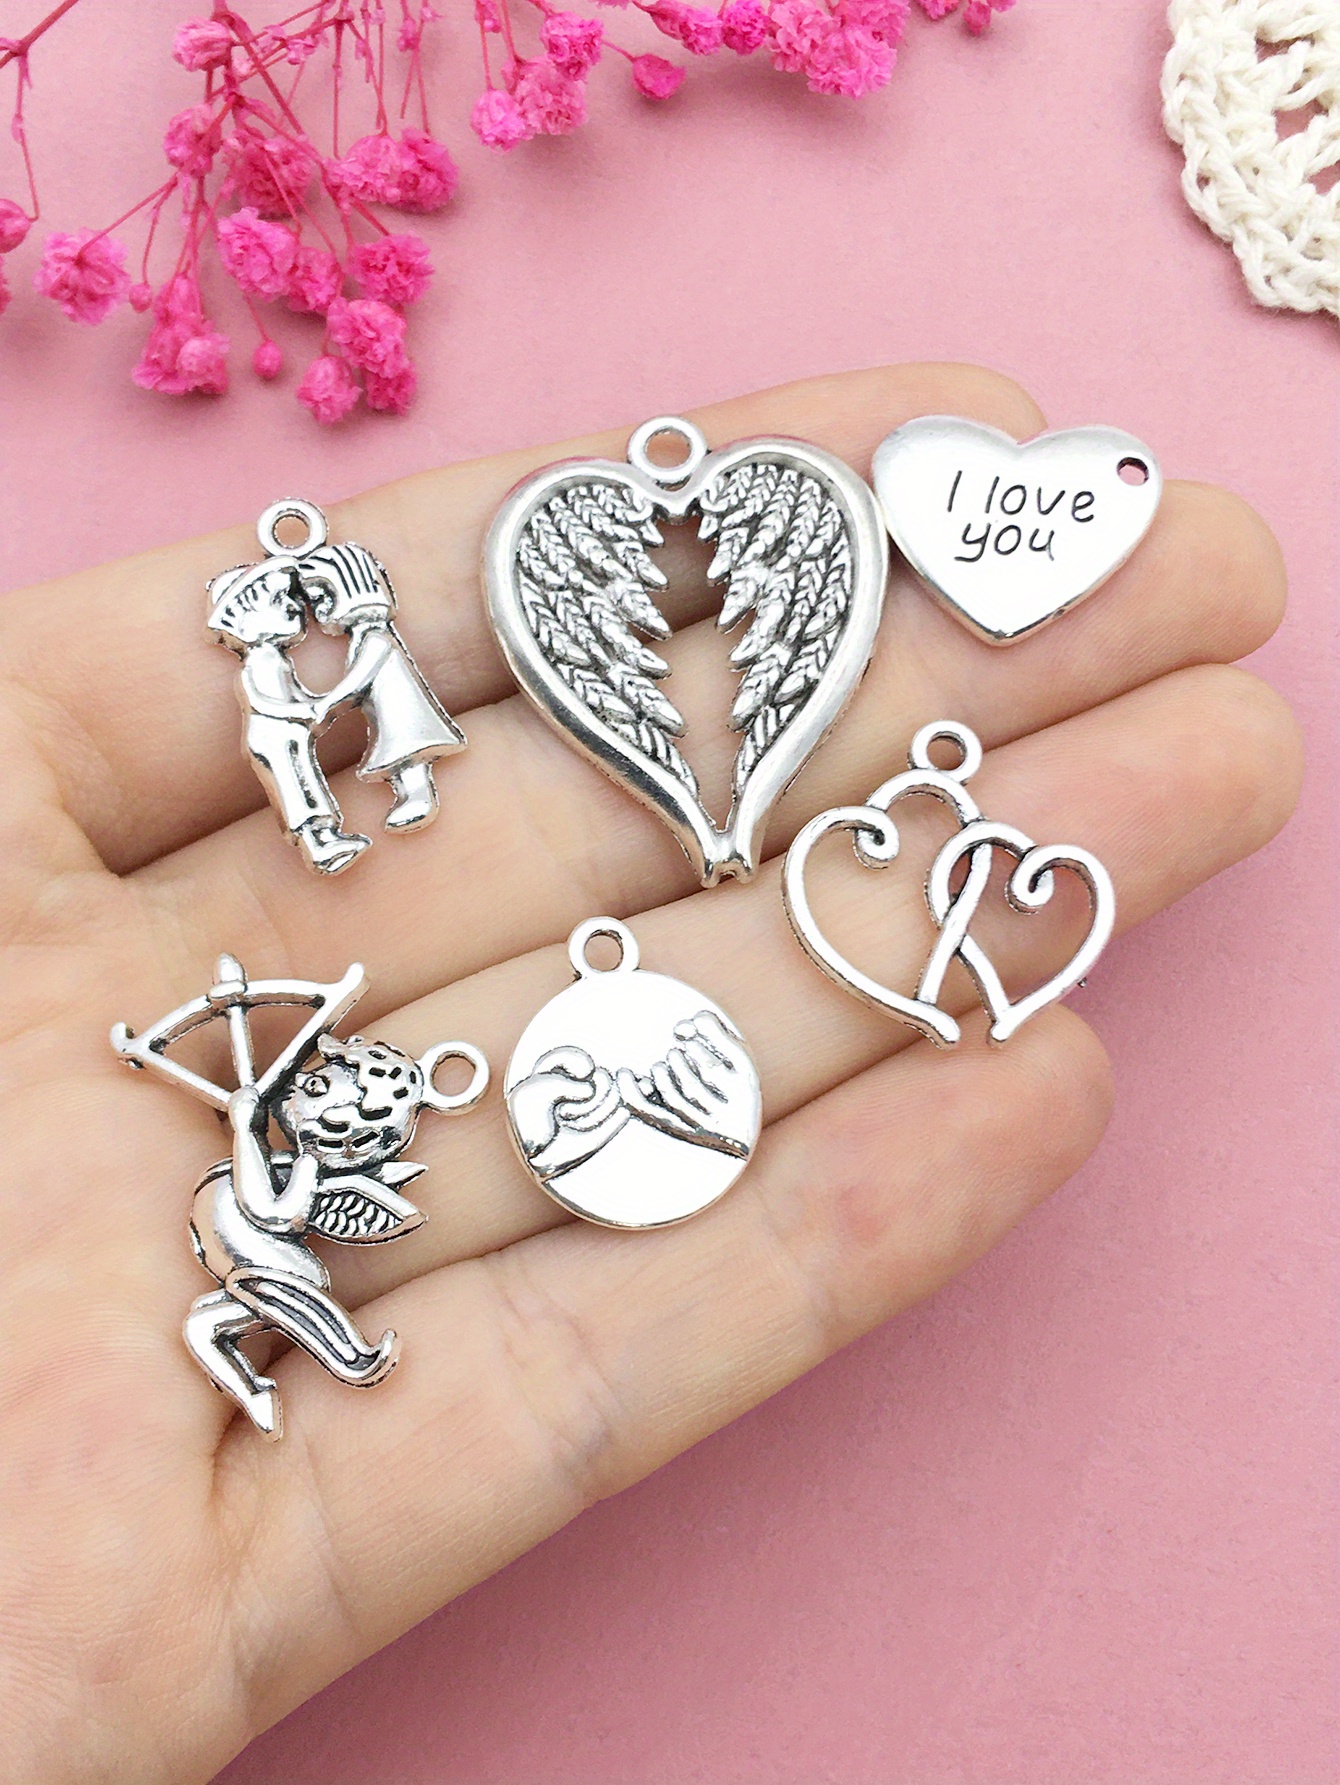 Randomly Mix 20pcs Antique Silver Heart Charms Pendants For Jewelry Making  Findings Wedding Valentine's Day Mother's Day Charms Crafting Accessory For